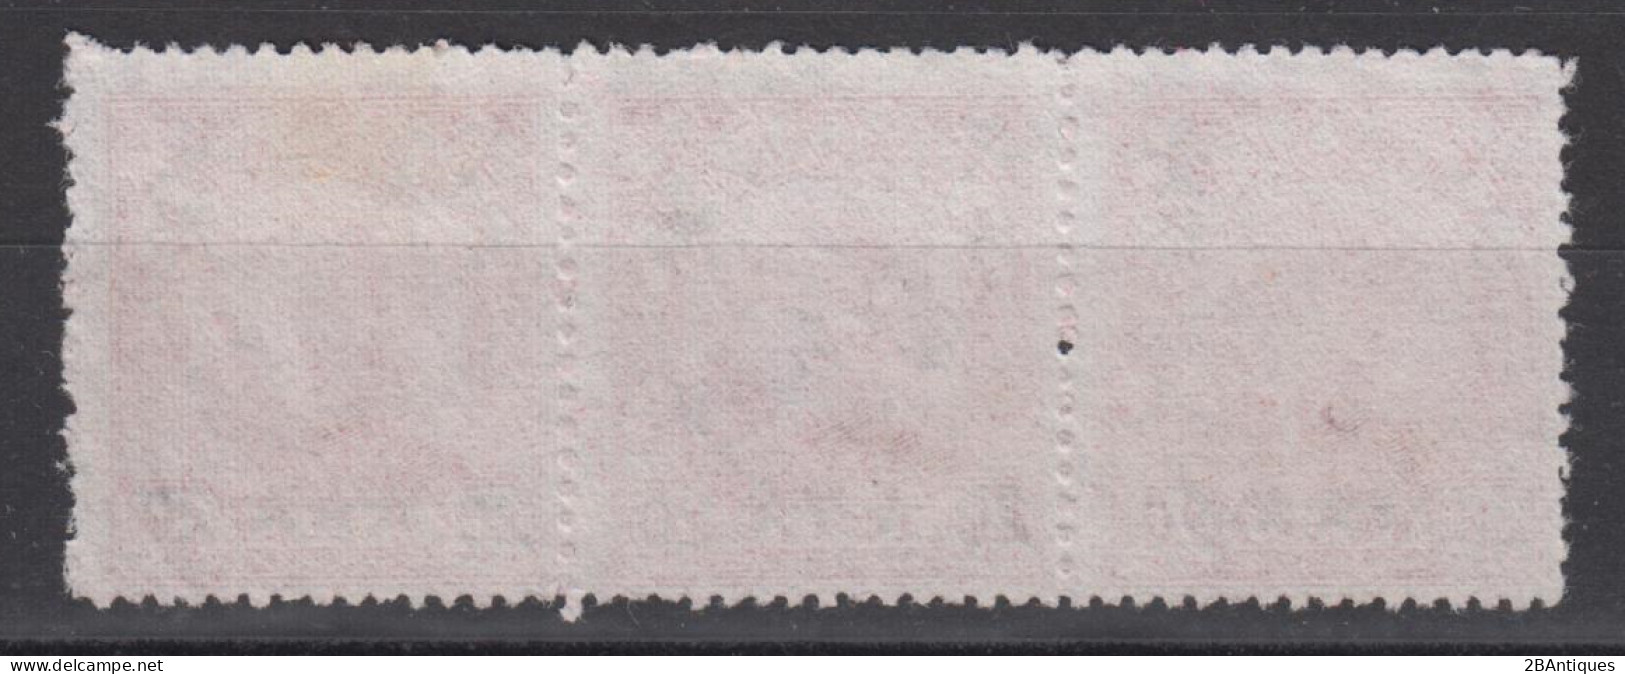 TAIWAN 1949-1950 - North East China Postage Stamps Surcharged STRIP OF 3 - Usados